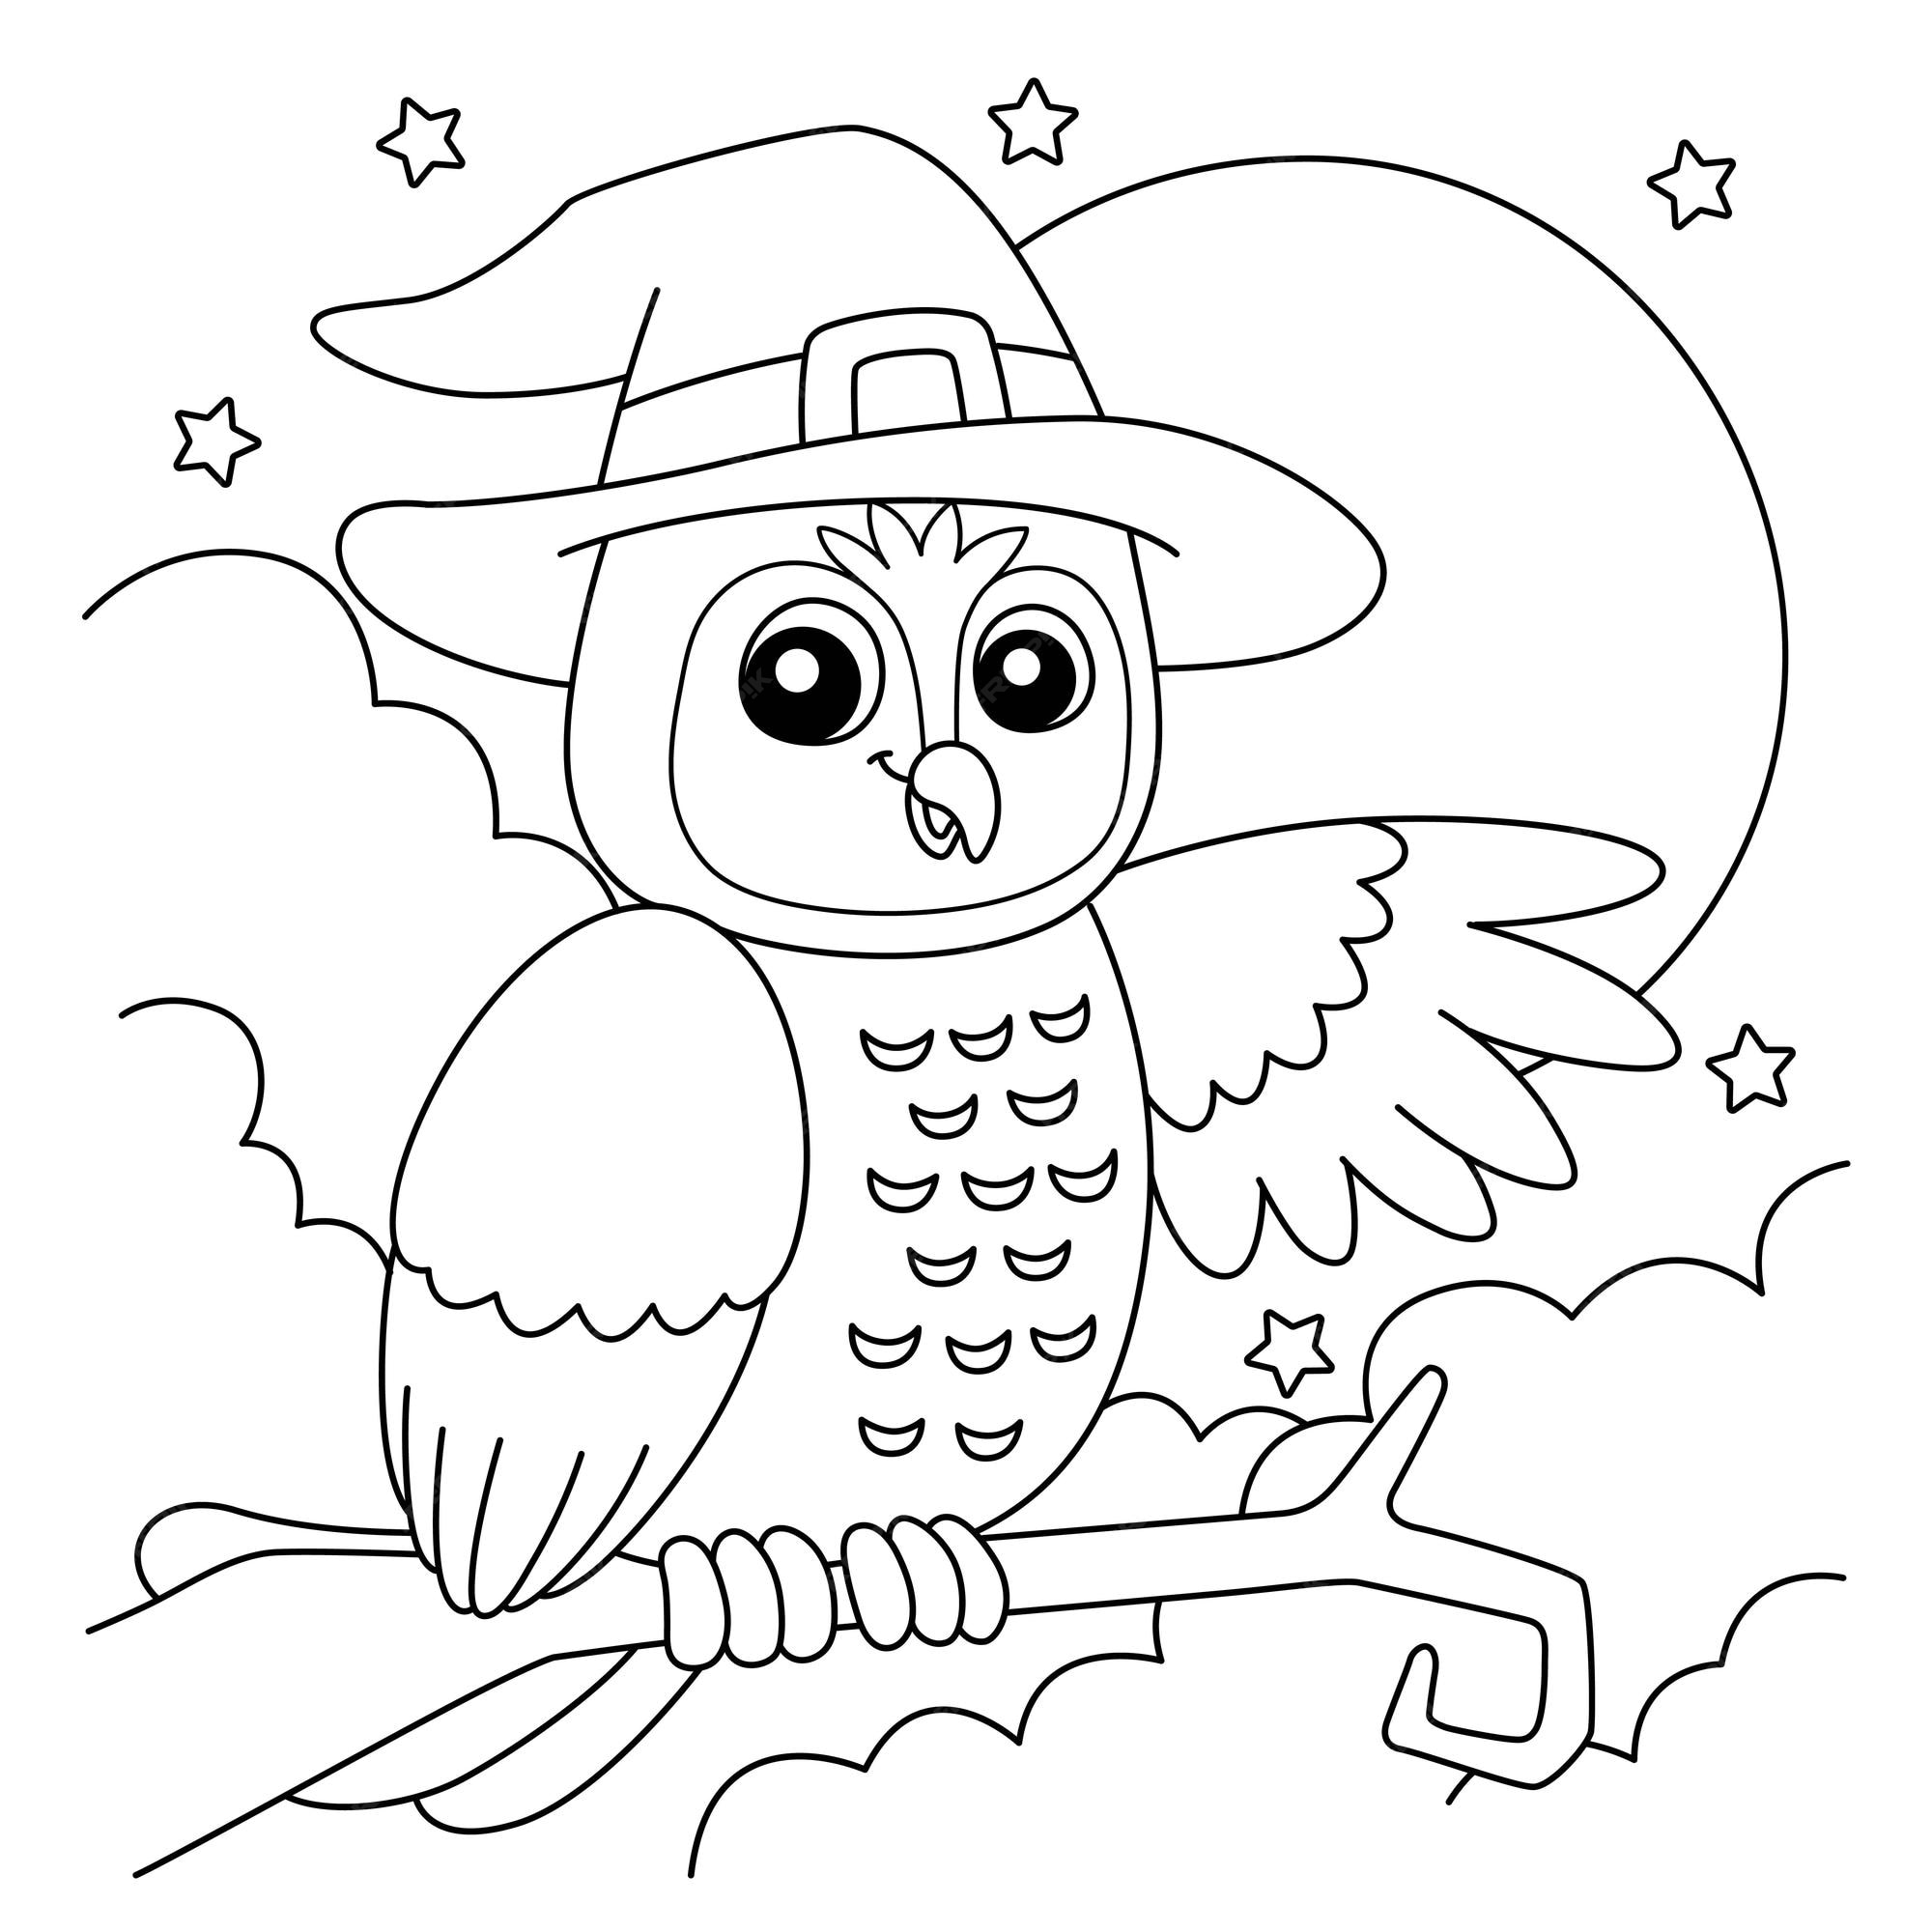 Premium vector owl witch hat halloween coloring page for kids